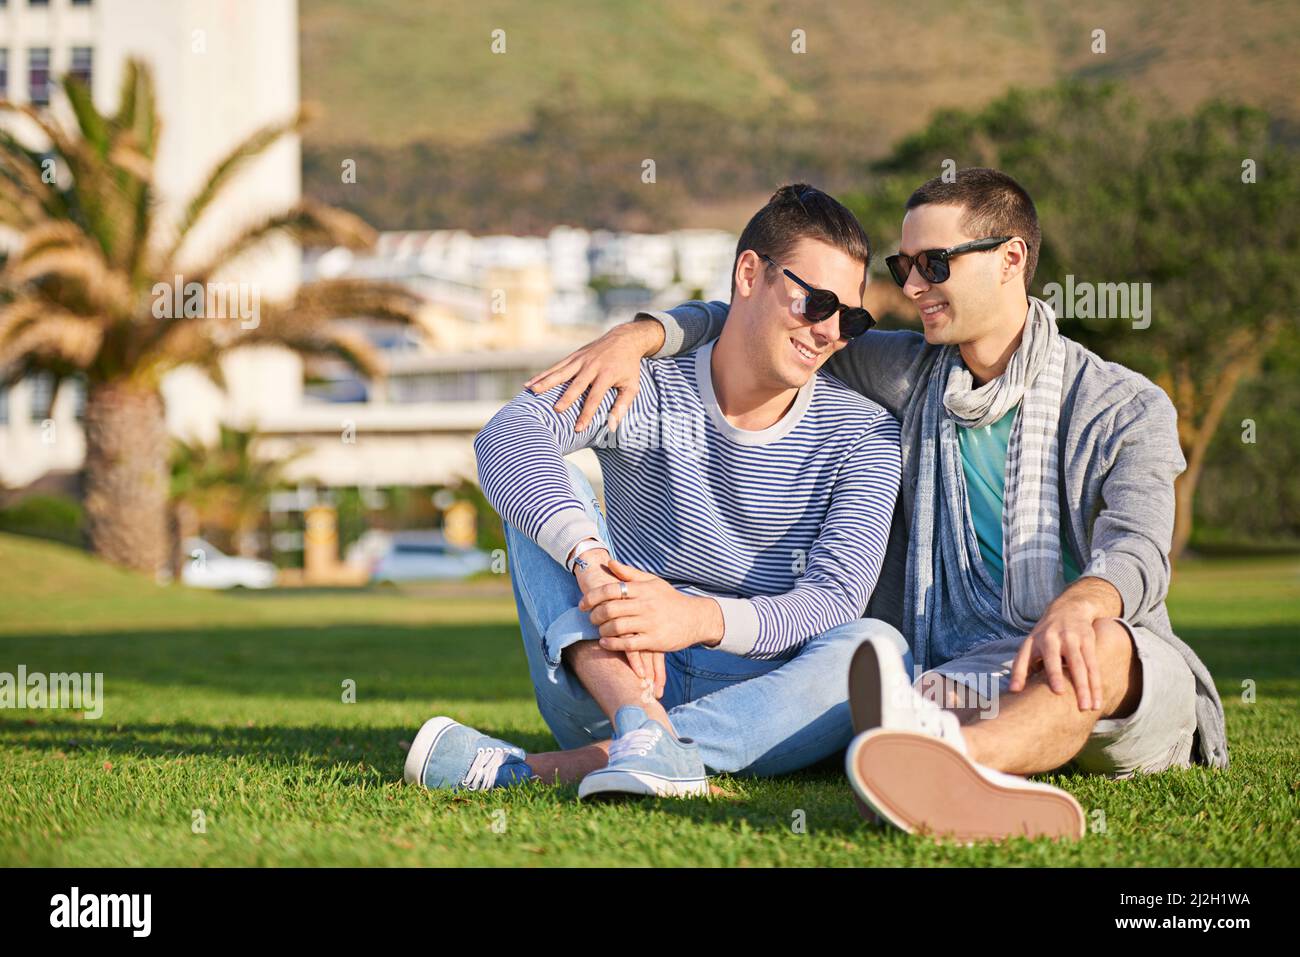 Another perfect day together. Shot of a young gay couple enjoying their day together outside. Stock Photo